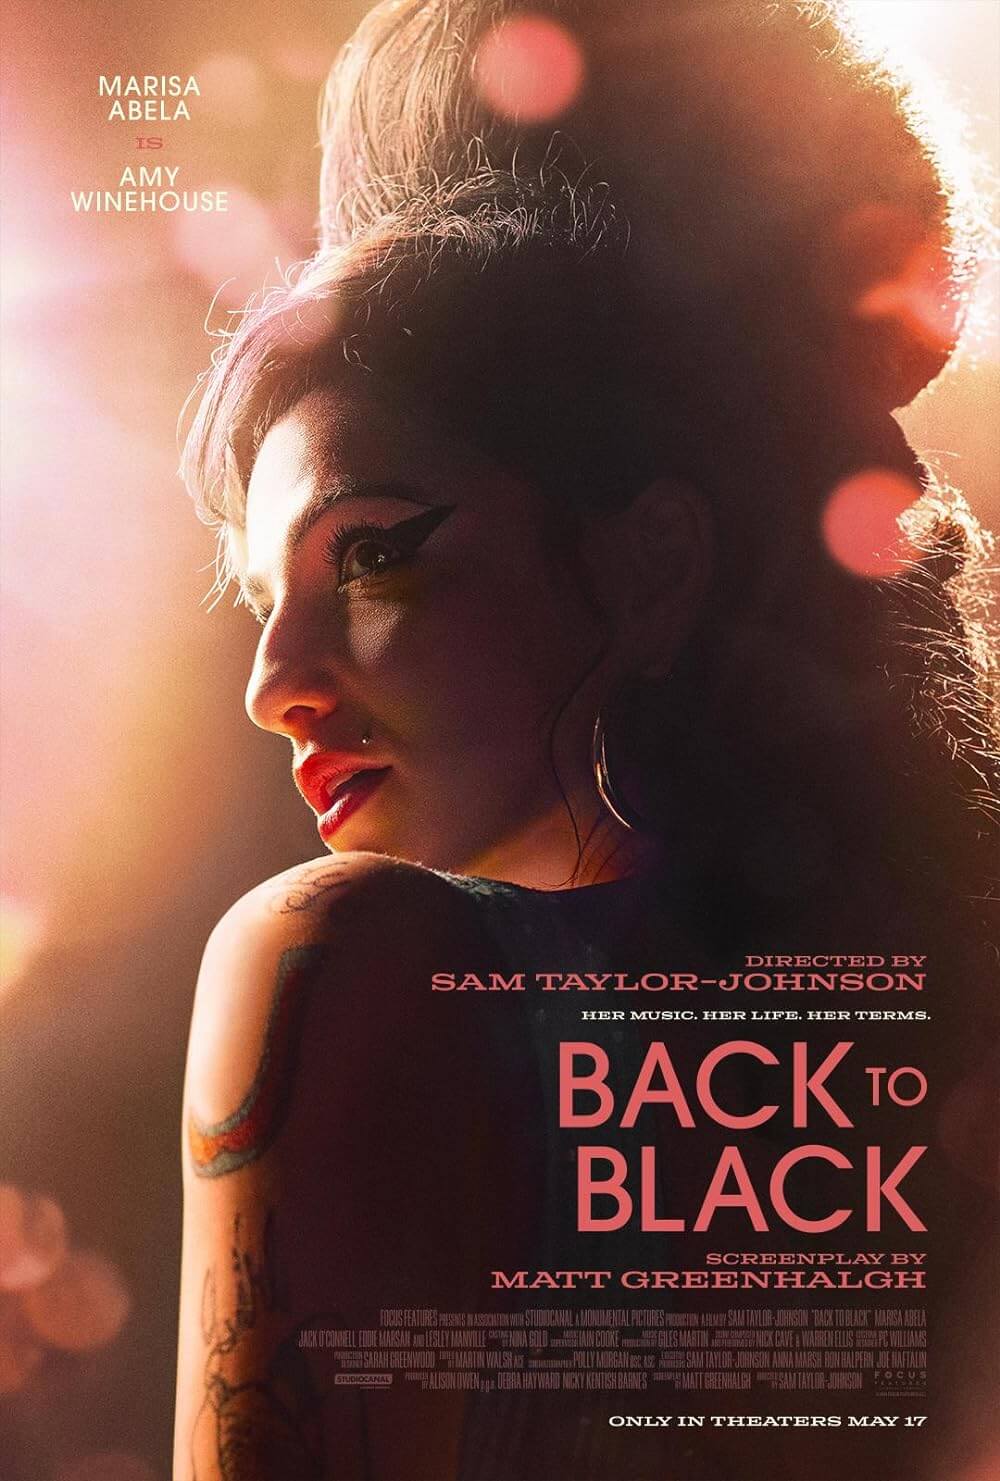 Watch trailer for back to black